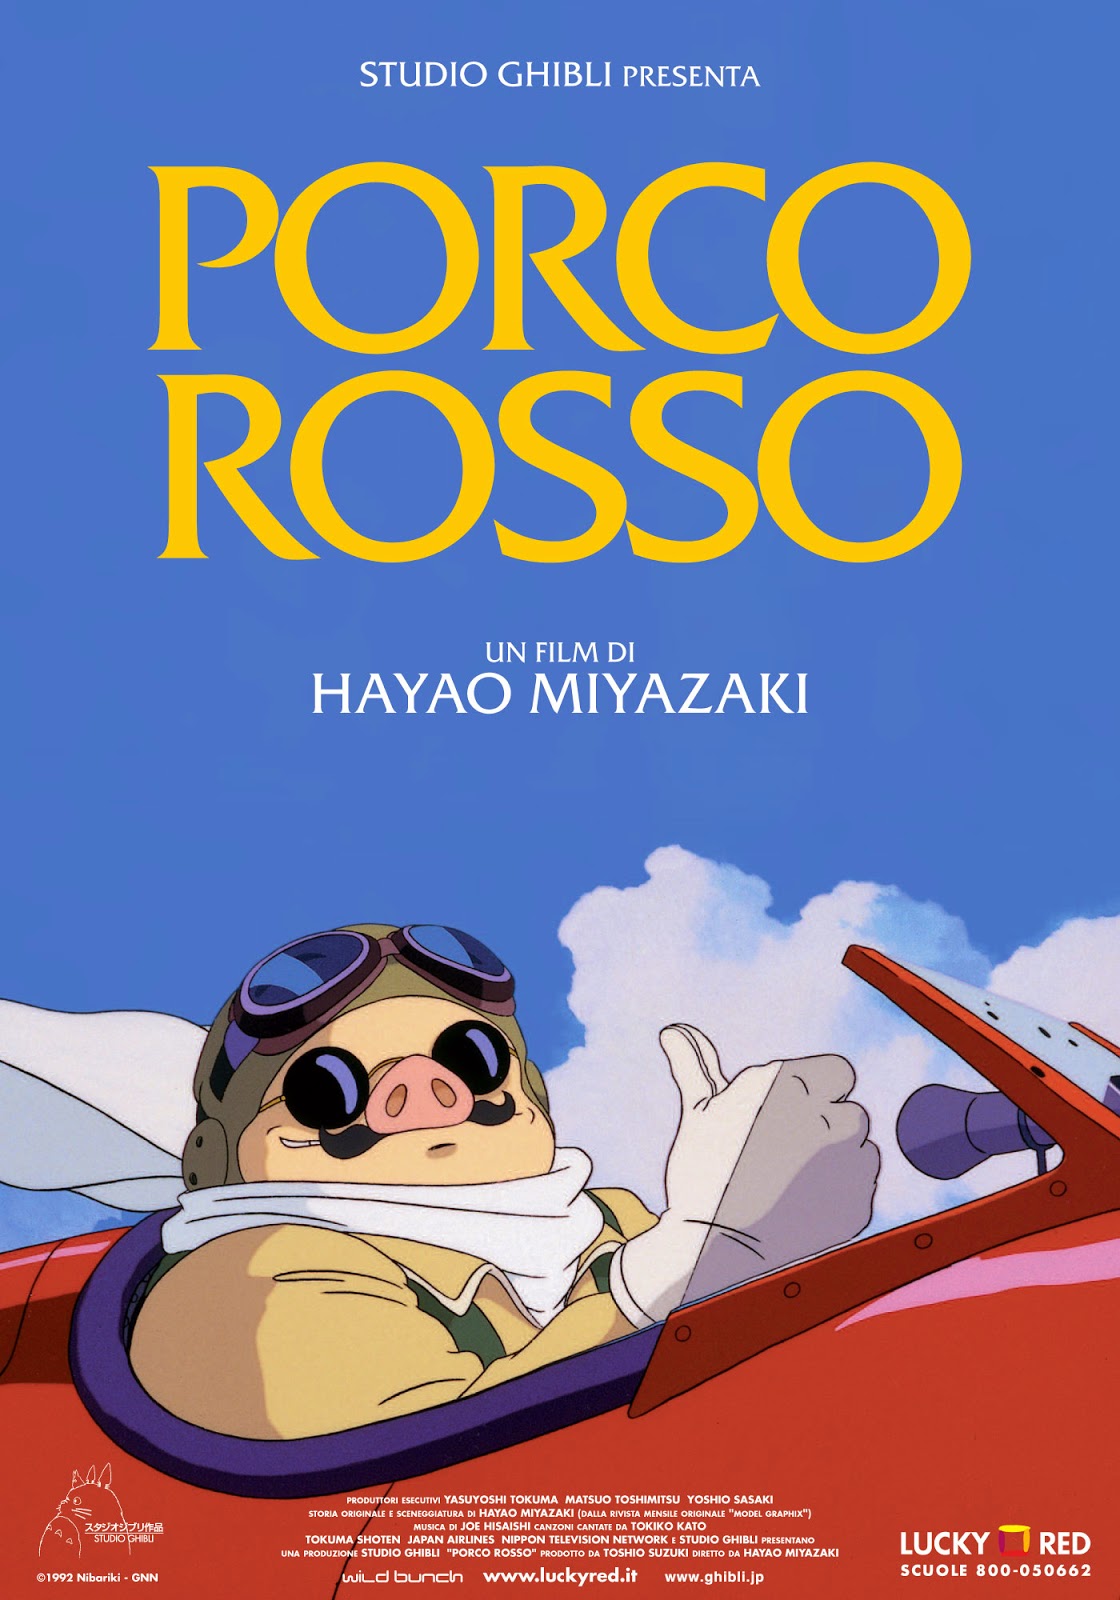 Watch Porco Rosso (1992) Online For Free Full Movie English Stream